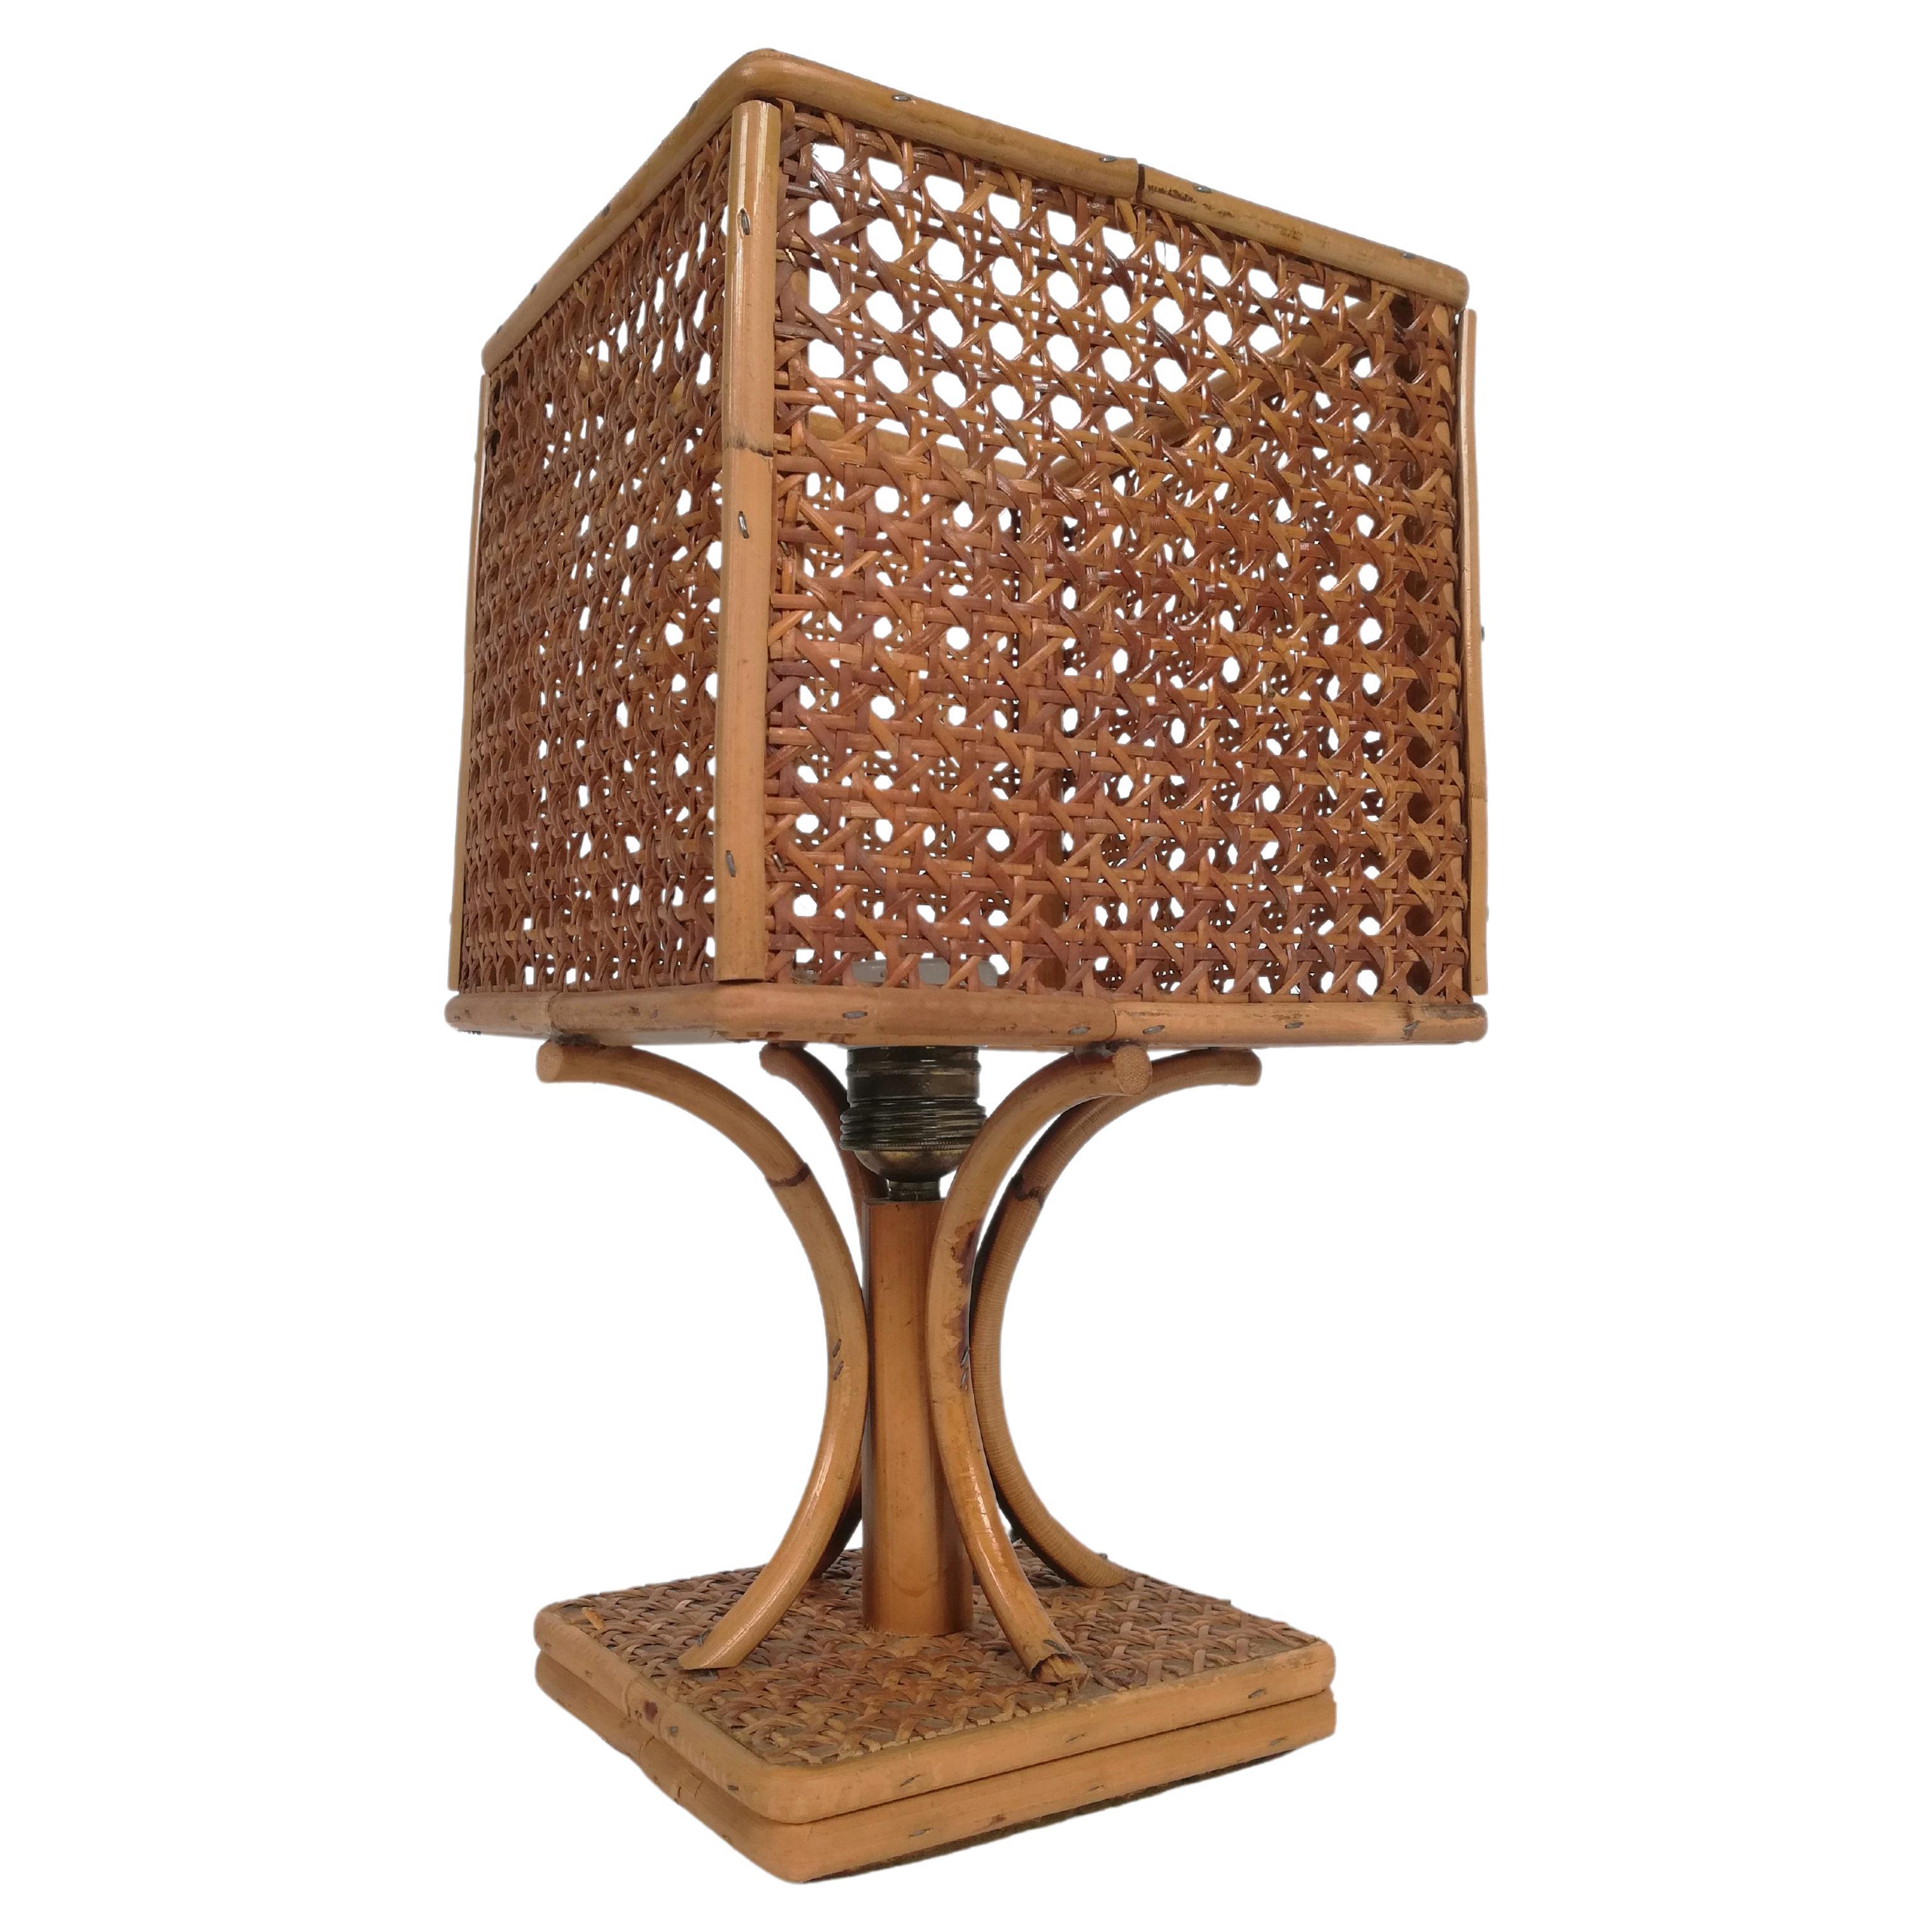 Midcentury Italian Table Lamp in Wicker Cane Webbing and Rattan, 1960s